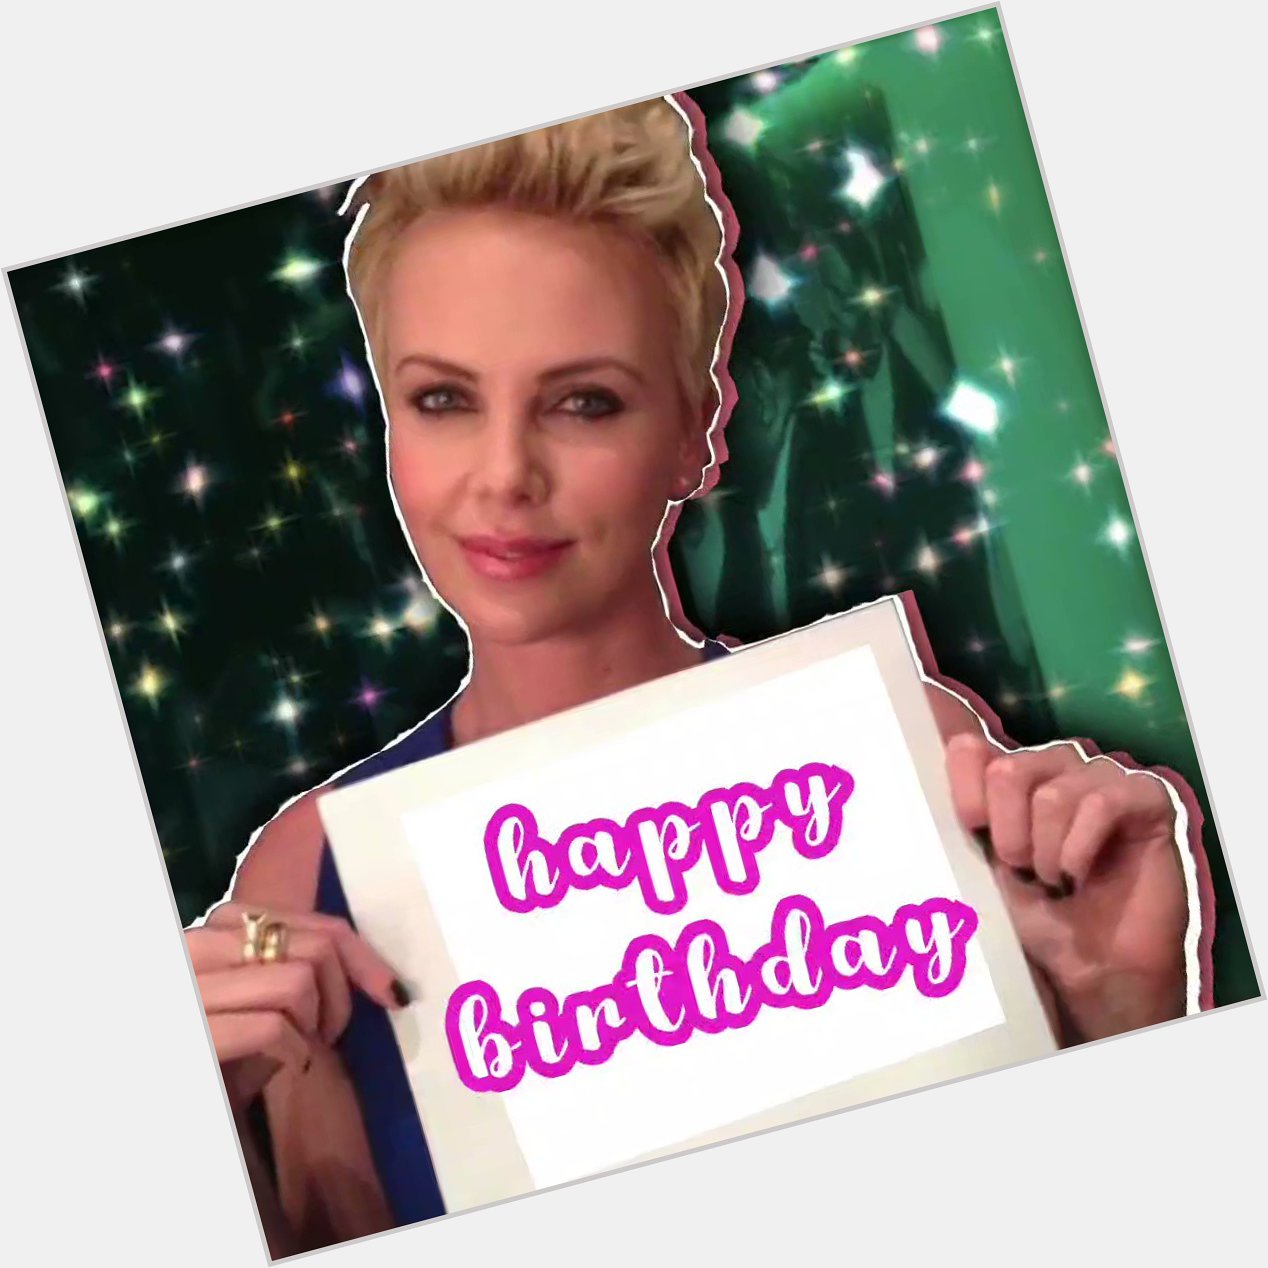 I am late but happy belated birthday to the beautiful & talented charlize theron!! 